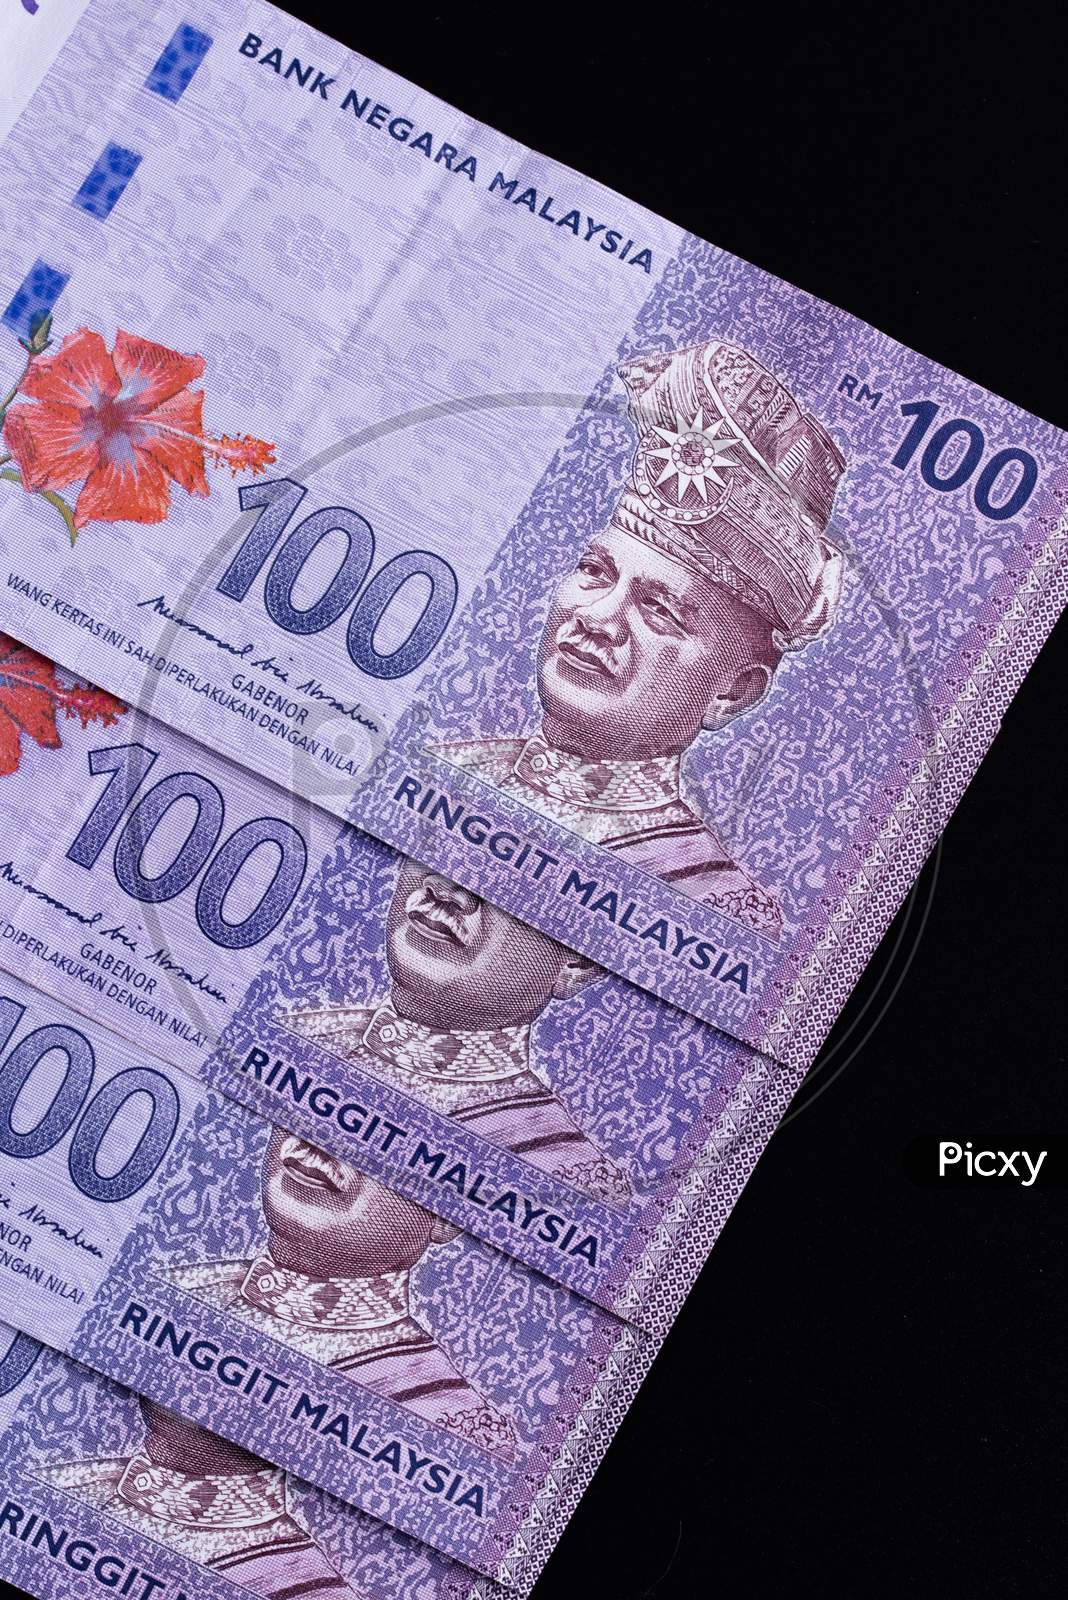 Malaysia Currency Of Malaysian Ringgit Banknotes Background. Paper Money Of Hundred Ringgit Notes On Etreme Closeup. Financial Concept.